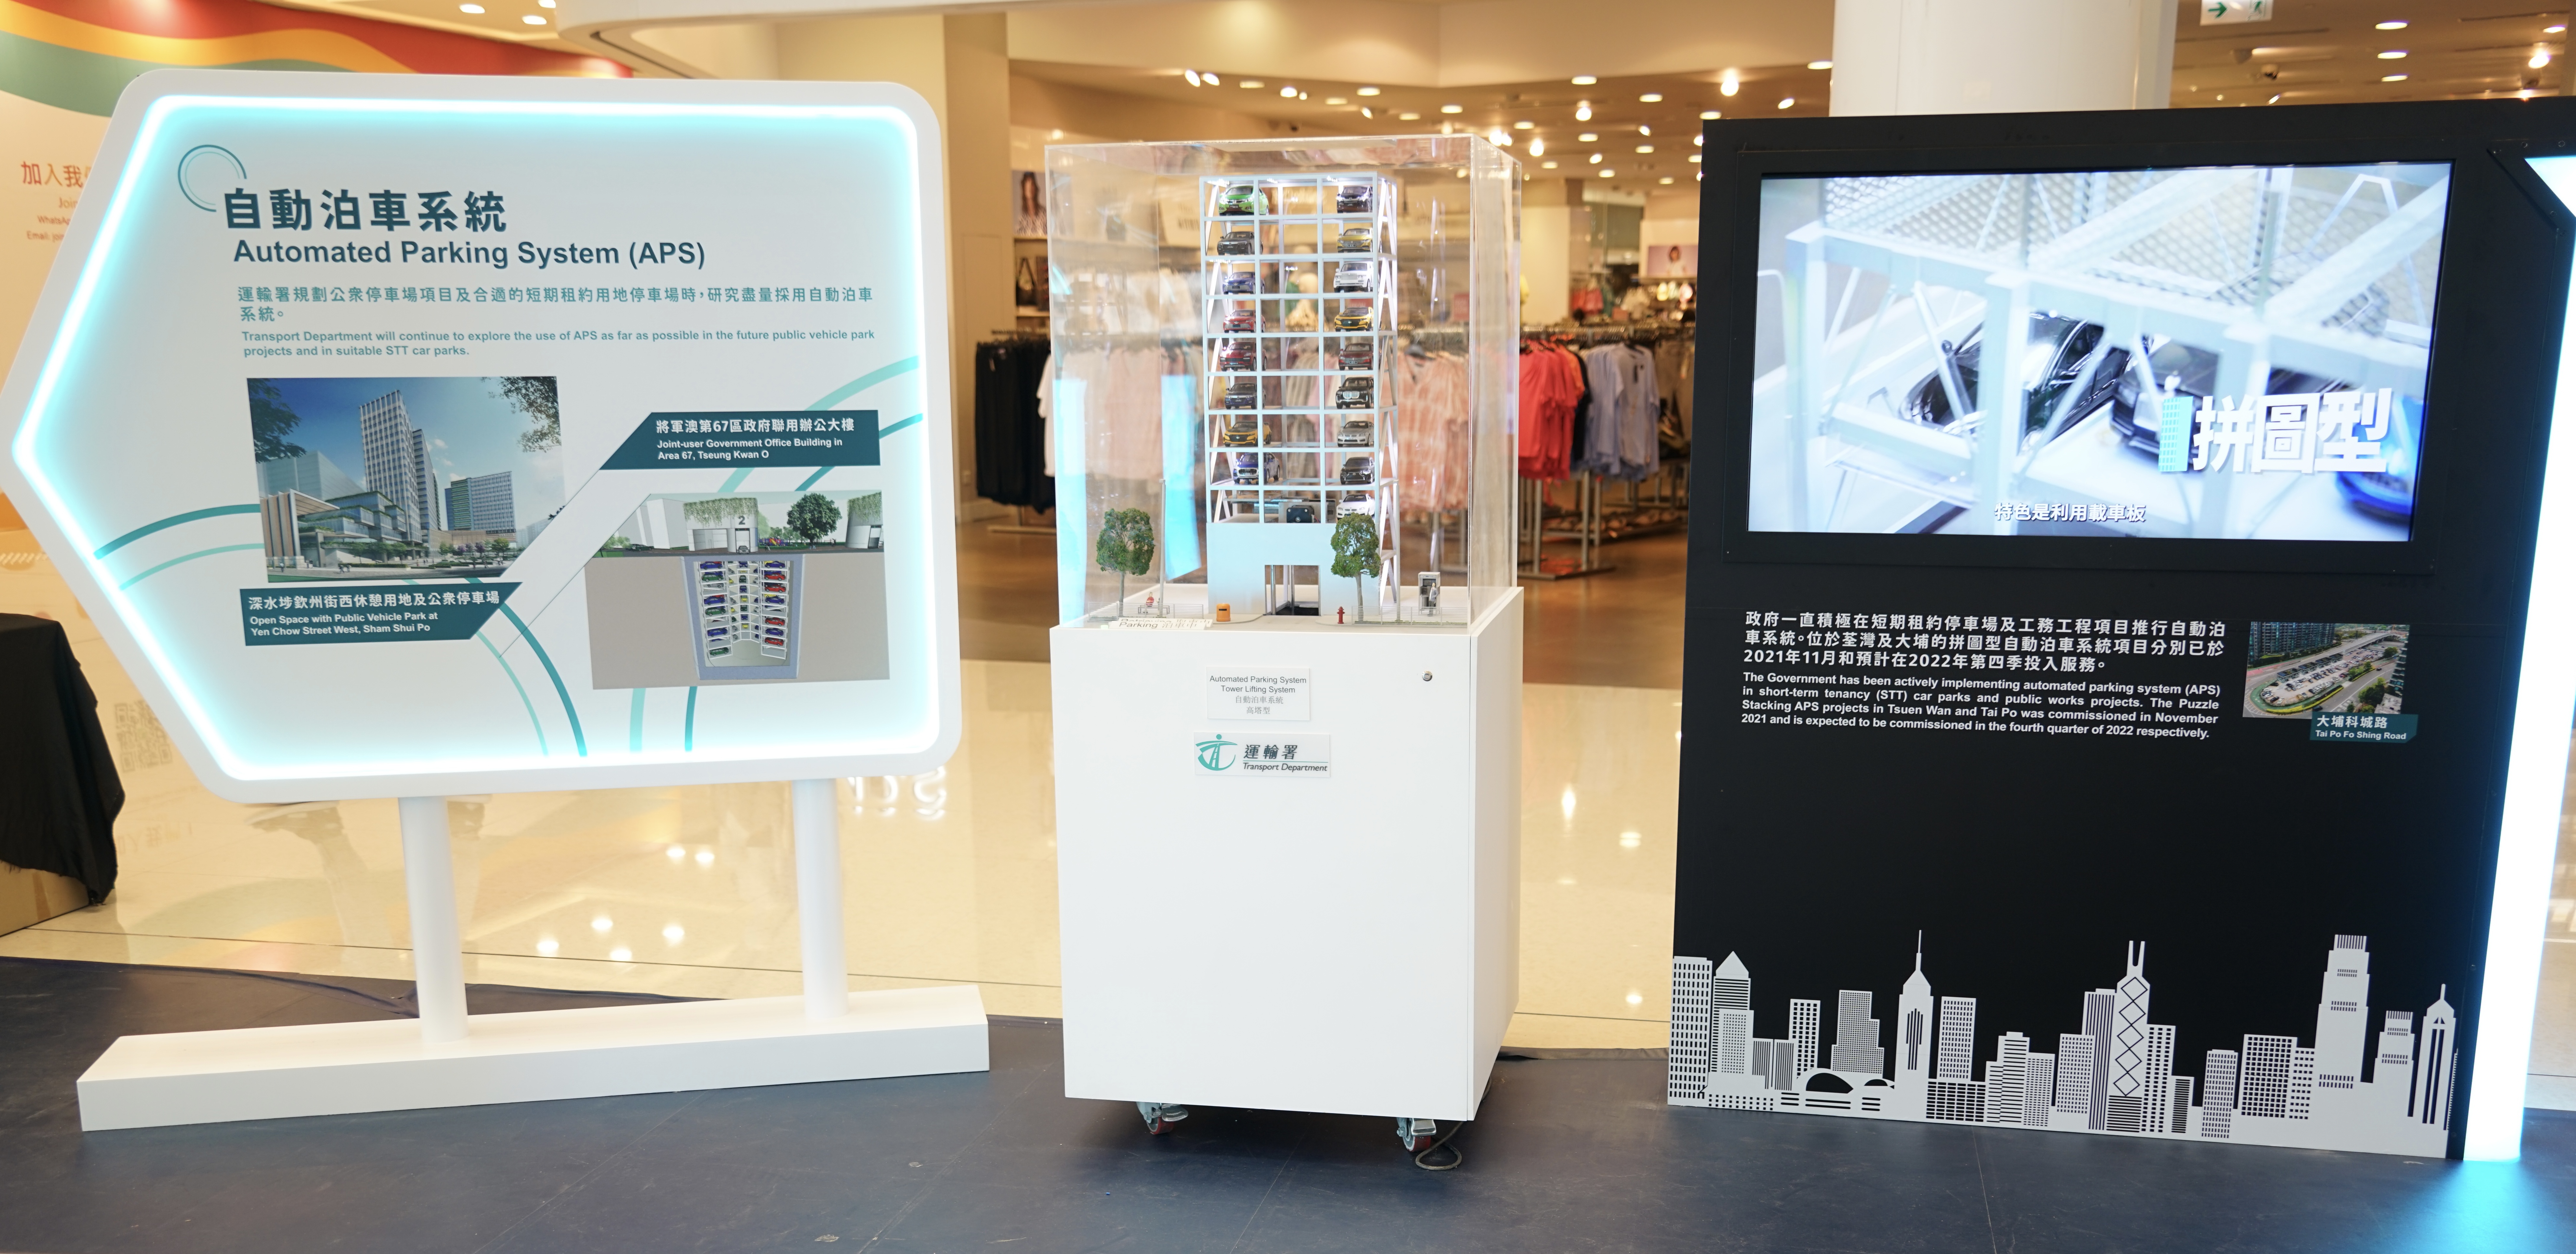 The Transport Department holds "Journey Smart" roving exhibition from today (July 23) until October. Physical model of tower type automated parking system is displayed at the exhibition.